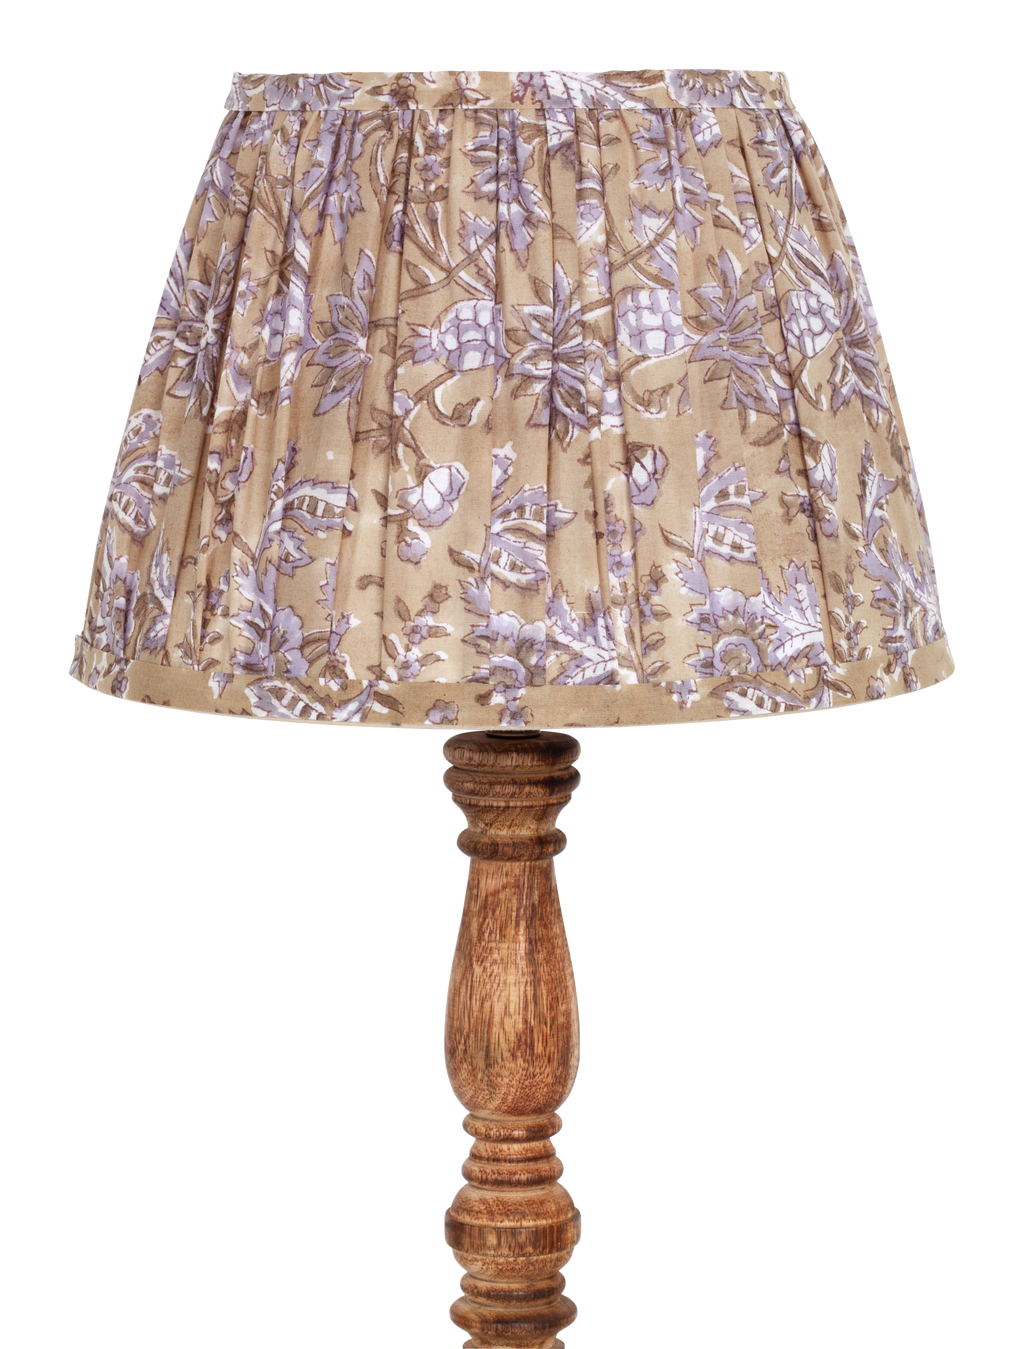 Lampshade with Indian Summer print in Beige/Lavender - Medium